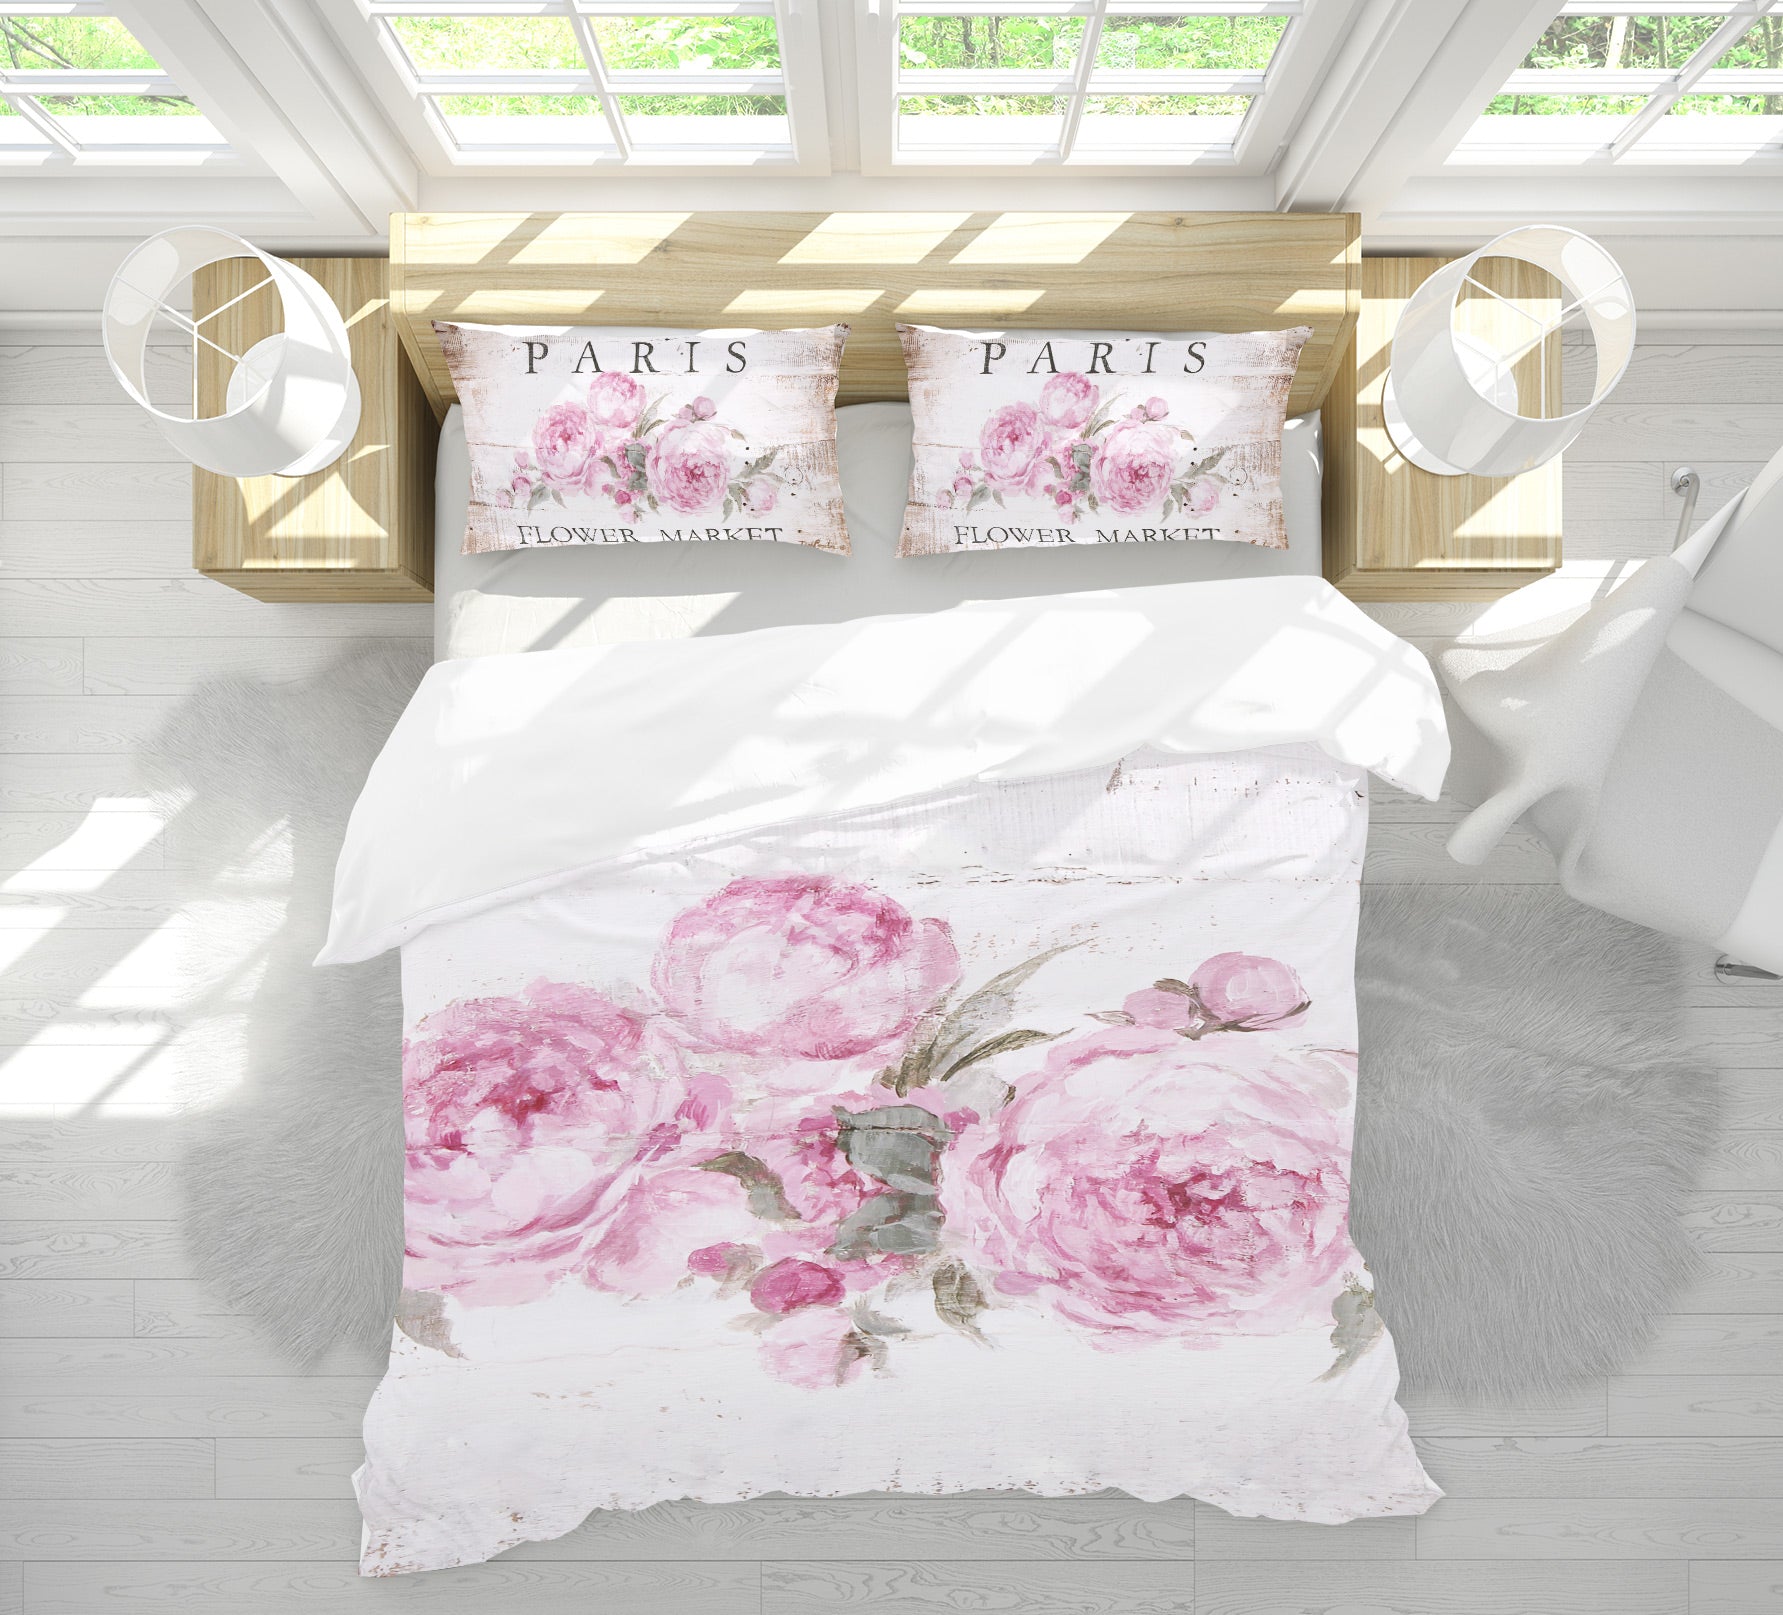 3D Flowers Rose 2117 Debi Coules Bedding Bed Pillowcases Quilt